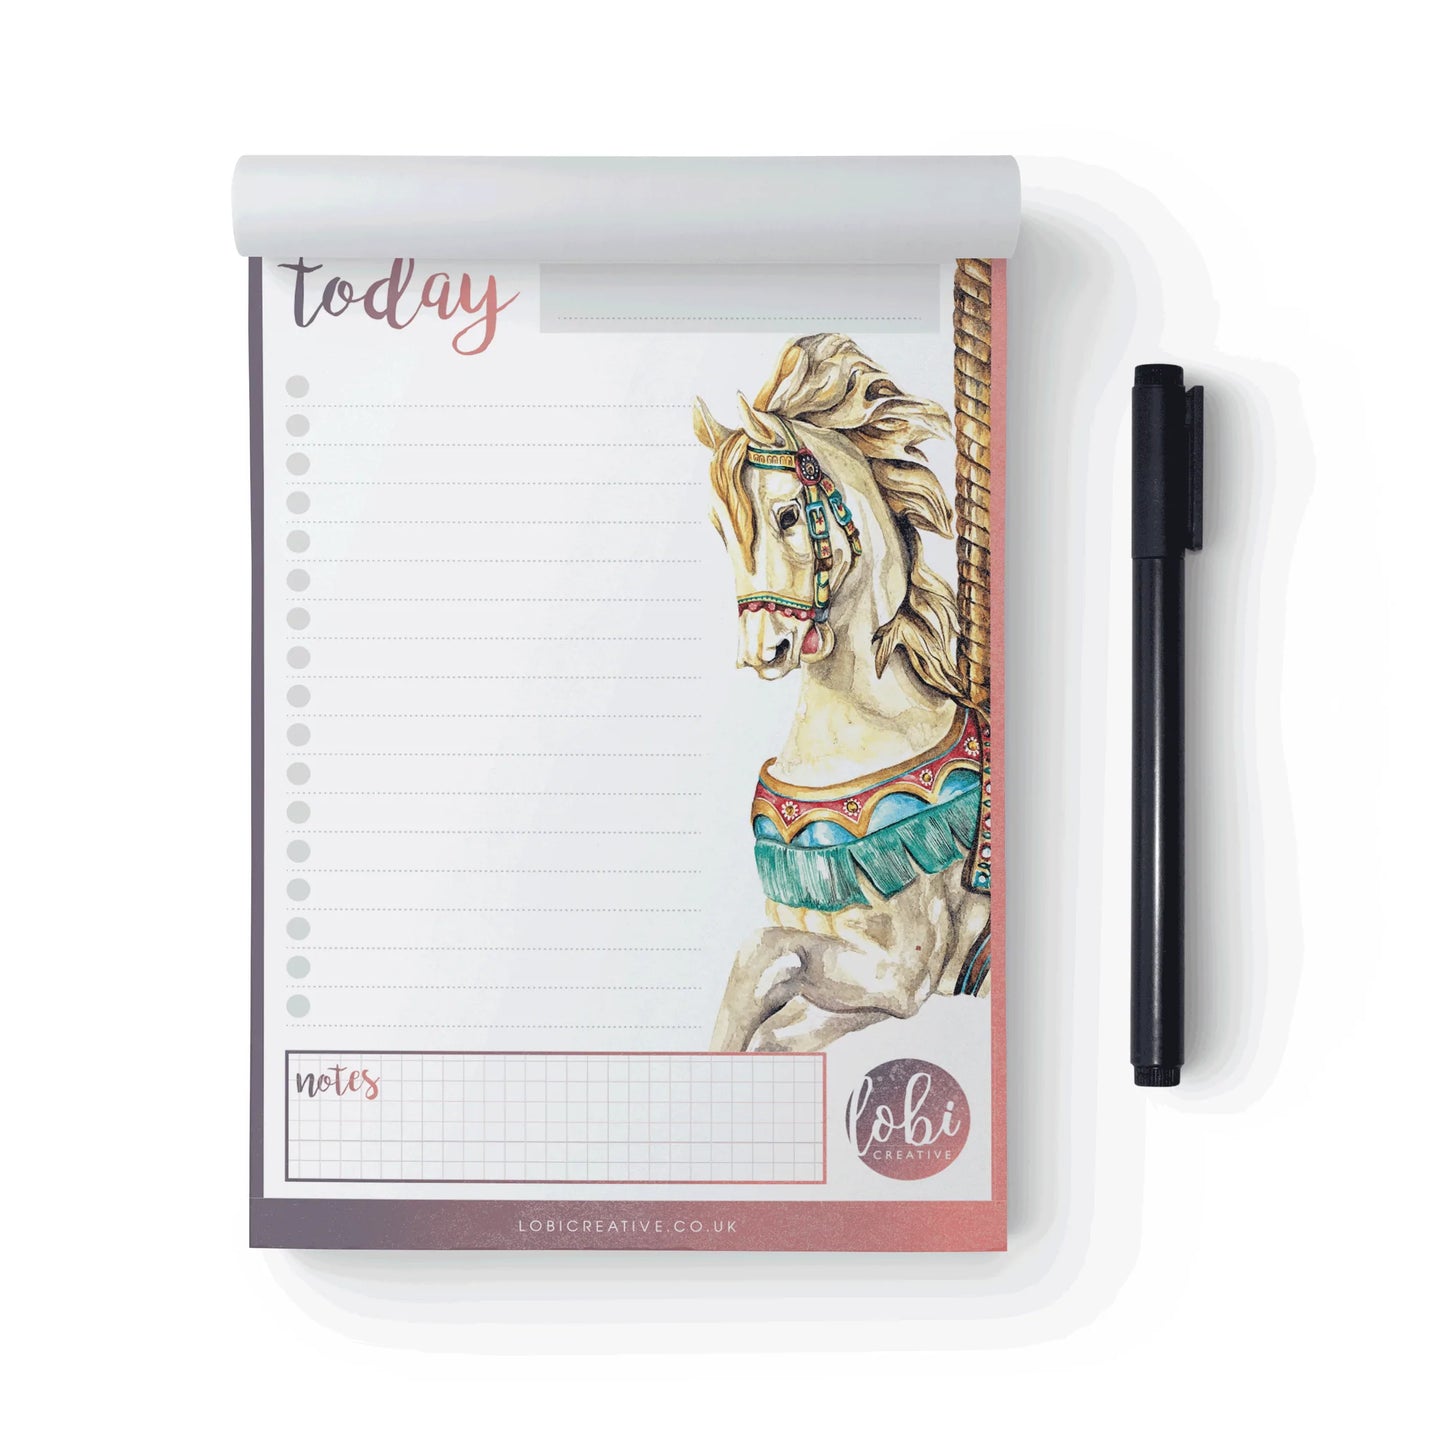 Eco friendly notepad for everyday task lists with artists drawing of carousel horse on the right hand side of page